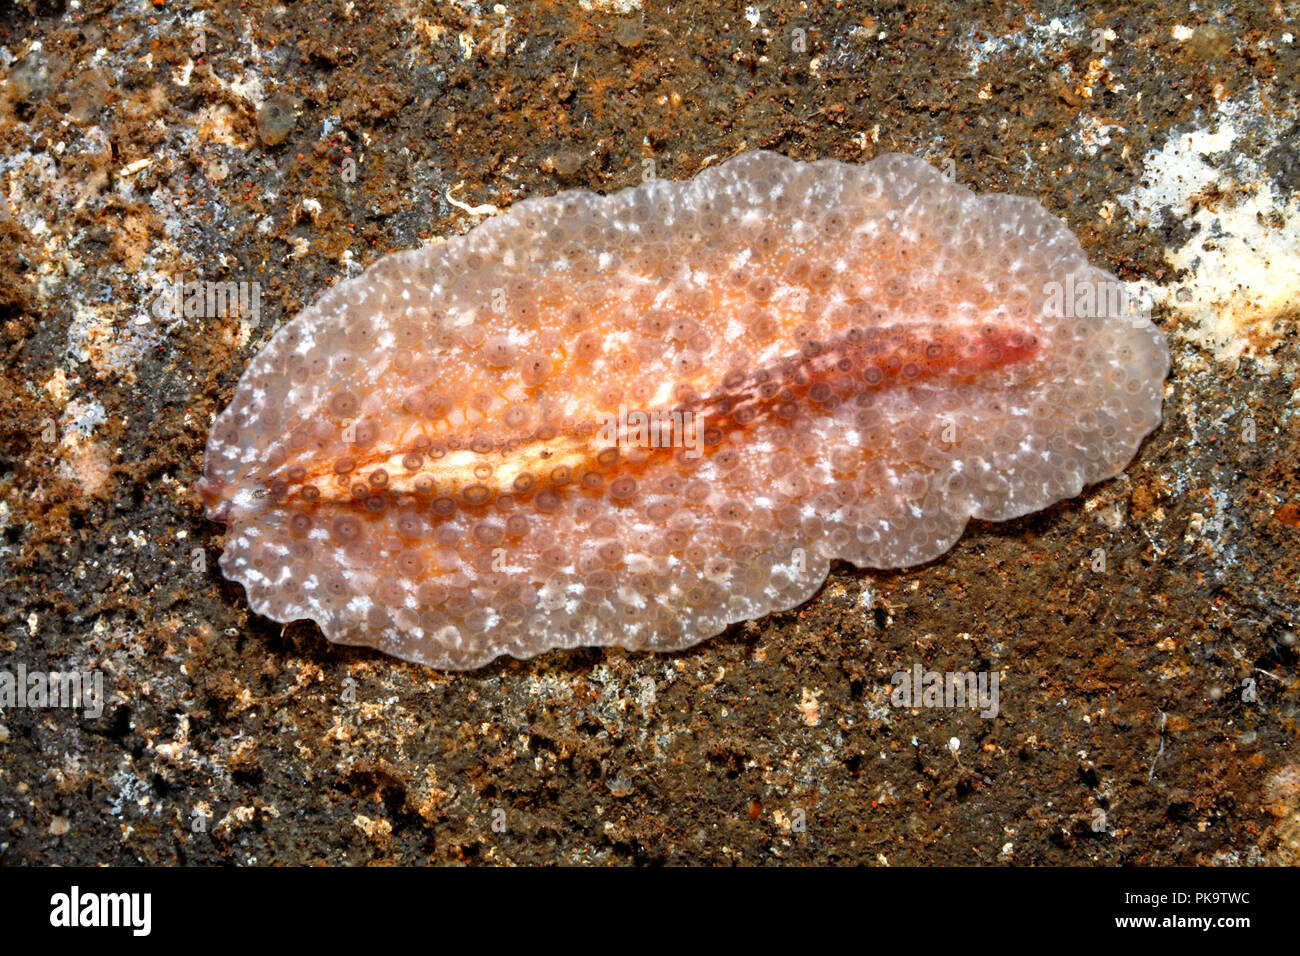 Marine Flatworm, Thysanozoon sp. Appears to be an undescribed species.Tulamben, Bali, Indonesia. Bali Sea, Indian Ocean Stock Photo